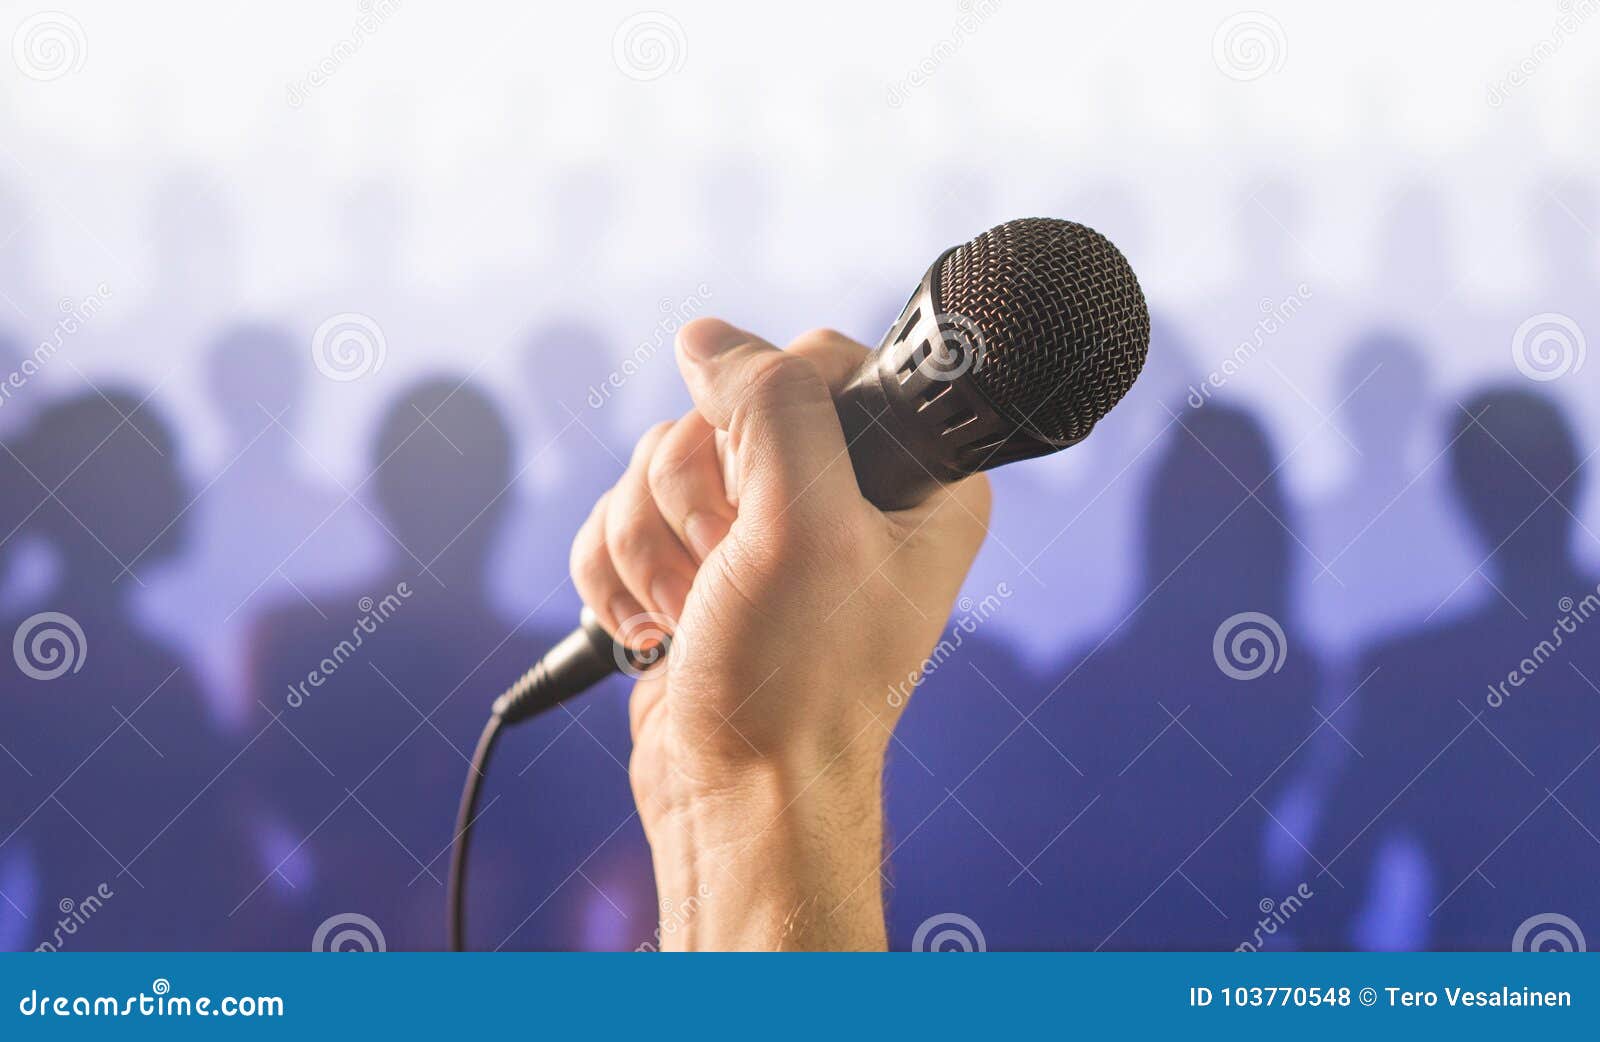 public speaking and giving speech concept.